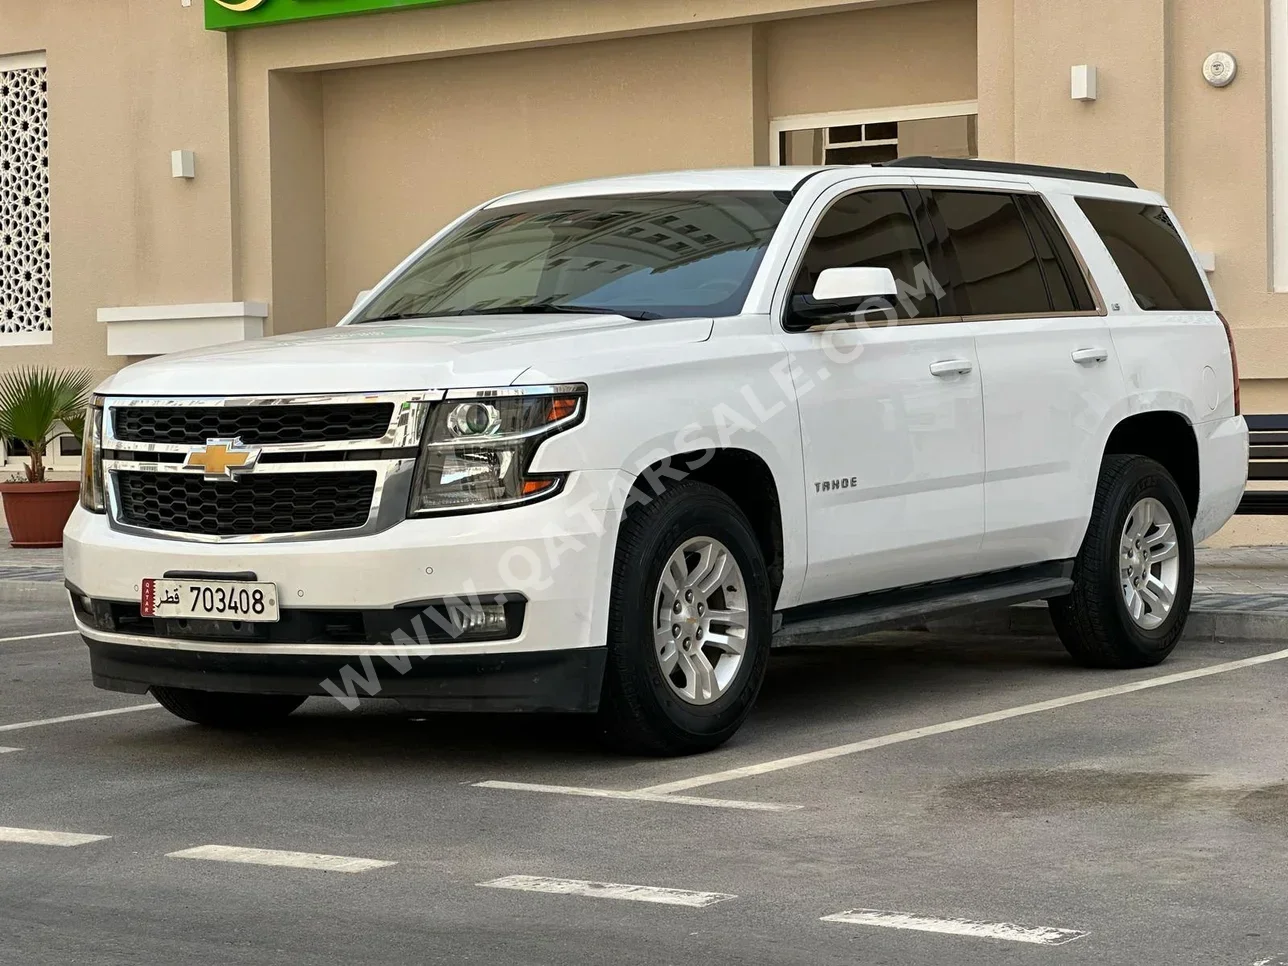 Chevrolet  Tahoe  LS  2016  Automatic  100,000 Km  8 Cylinder  Rear Wheel Drive (RWD)  SUV  White